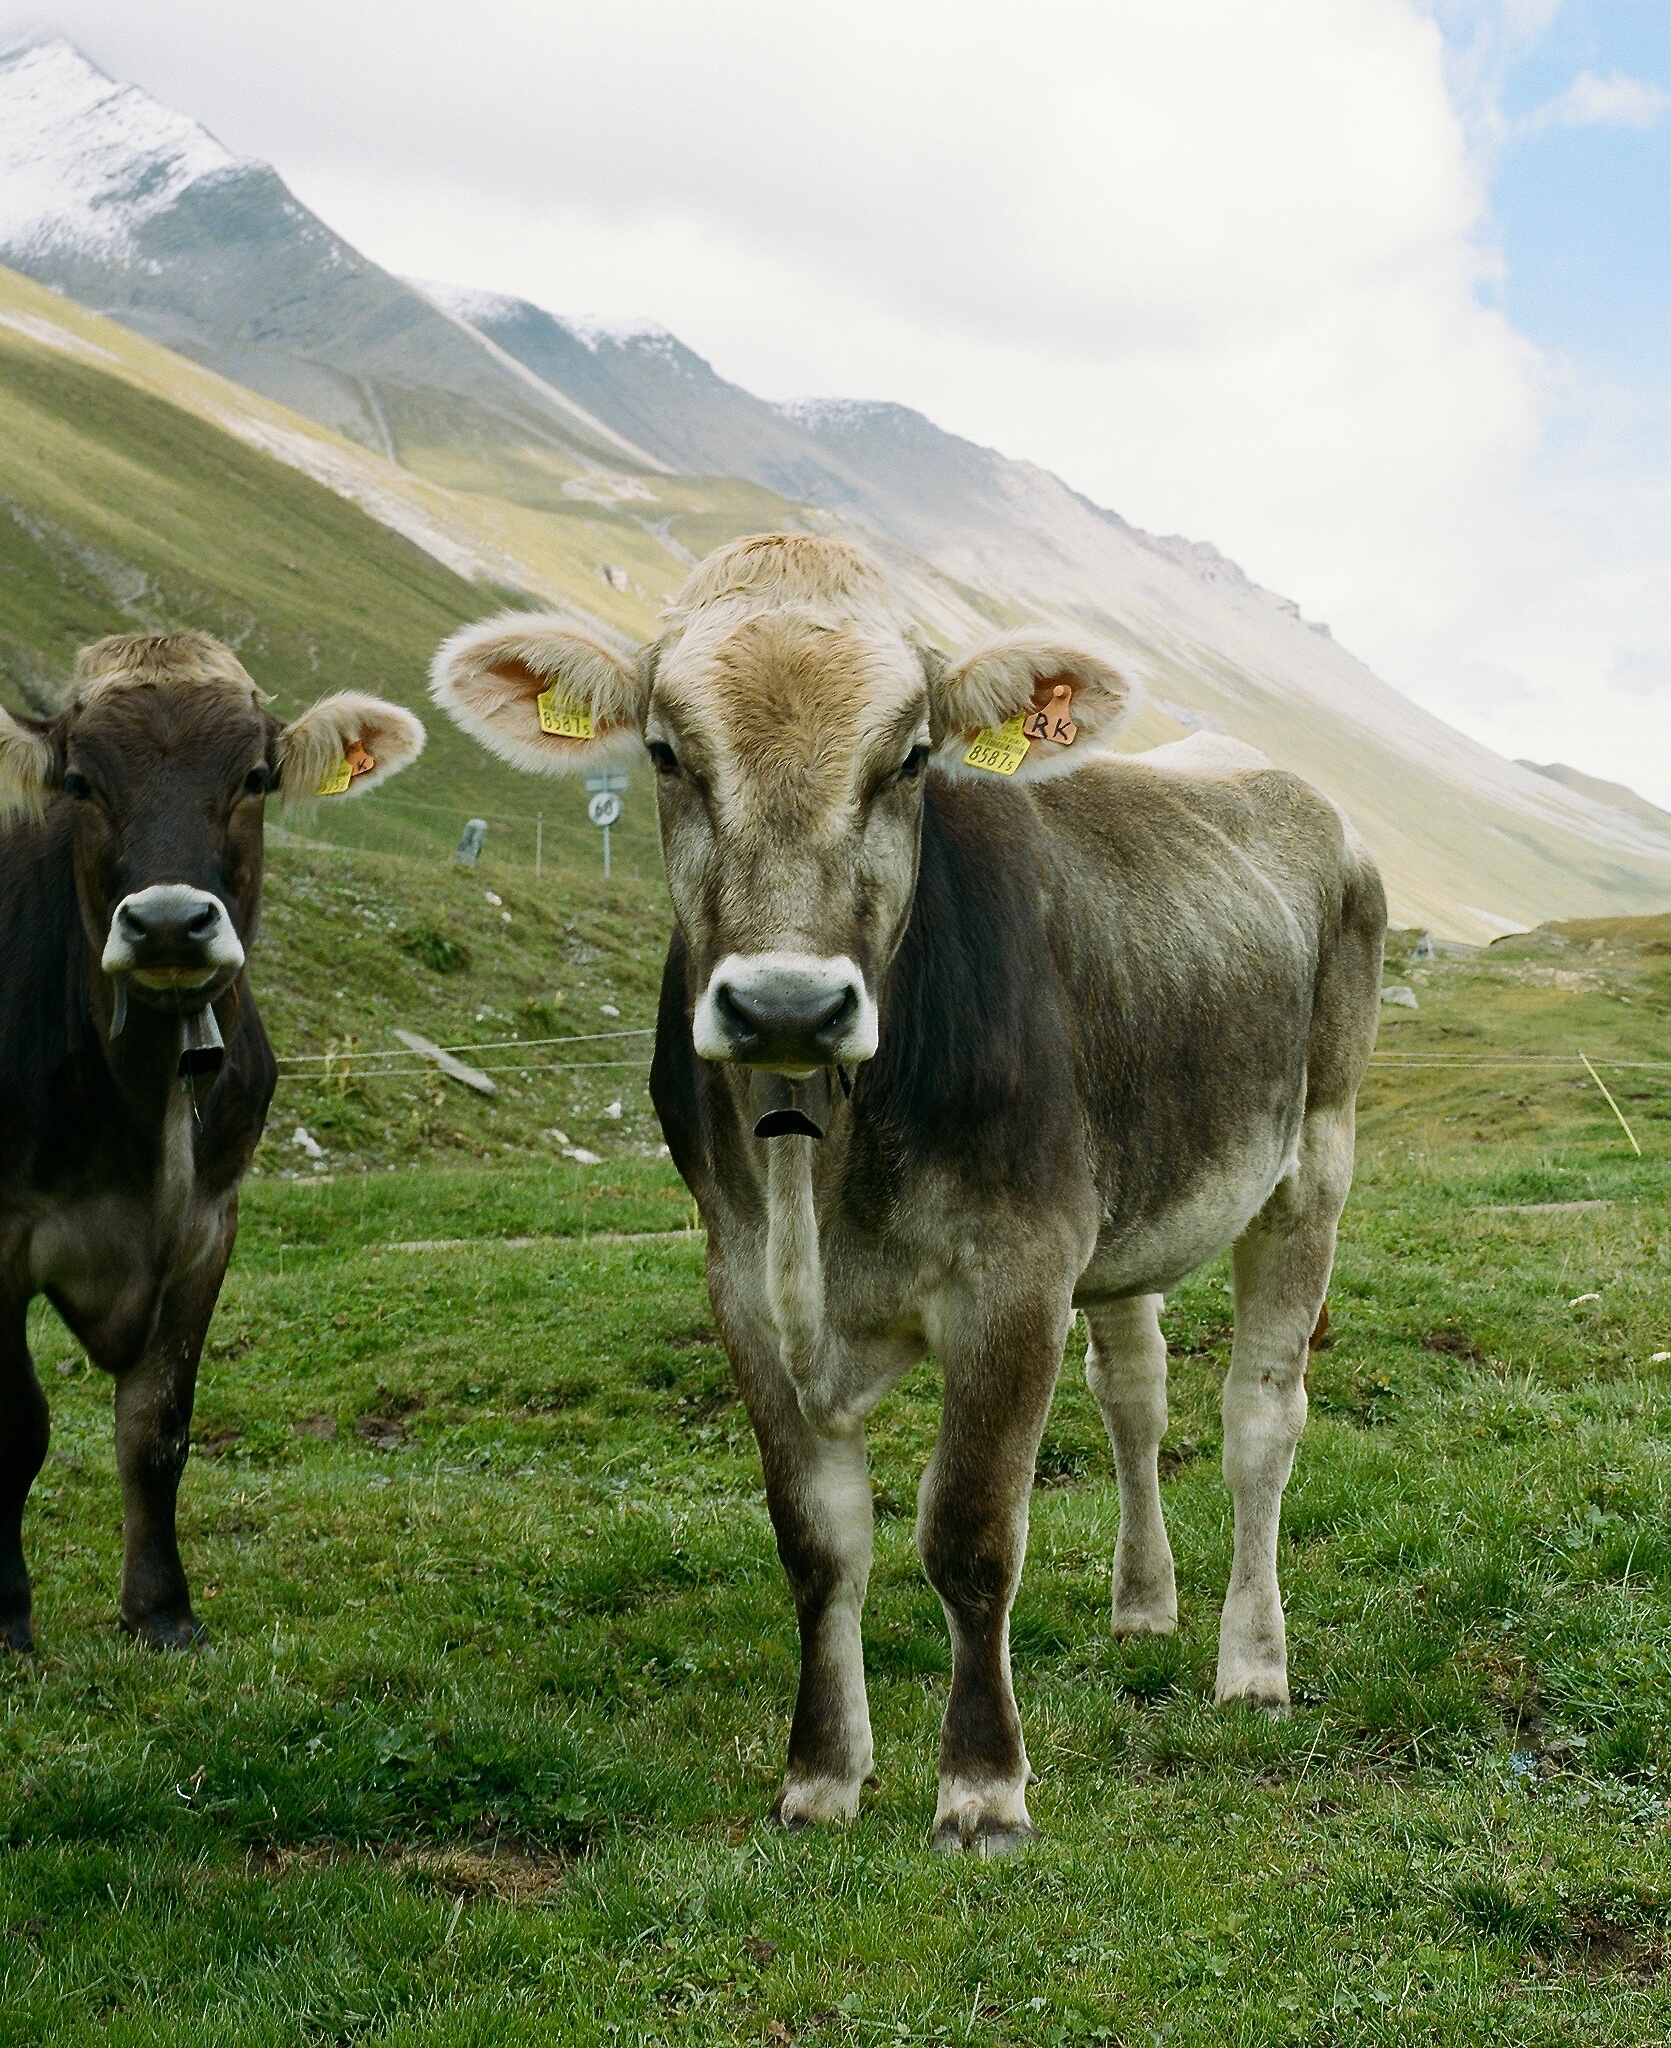 Cows in mountain pass near Pontresina, Switzerland. Taken in September, 2018 with Mamiya 7ii and 80mm lens, and Kodak Portra 400 120 film.